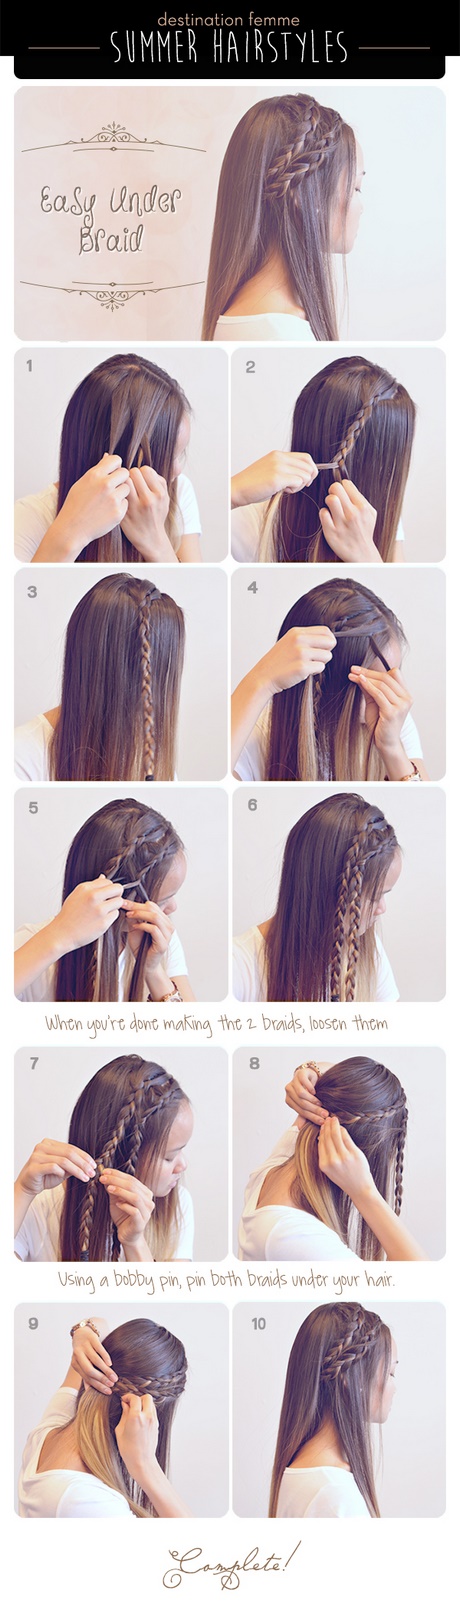 Cute easy hairstyles for summer cute-easy-hairstyles-for-summer-51_6